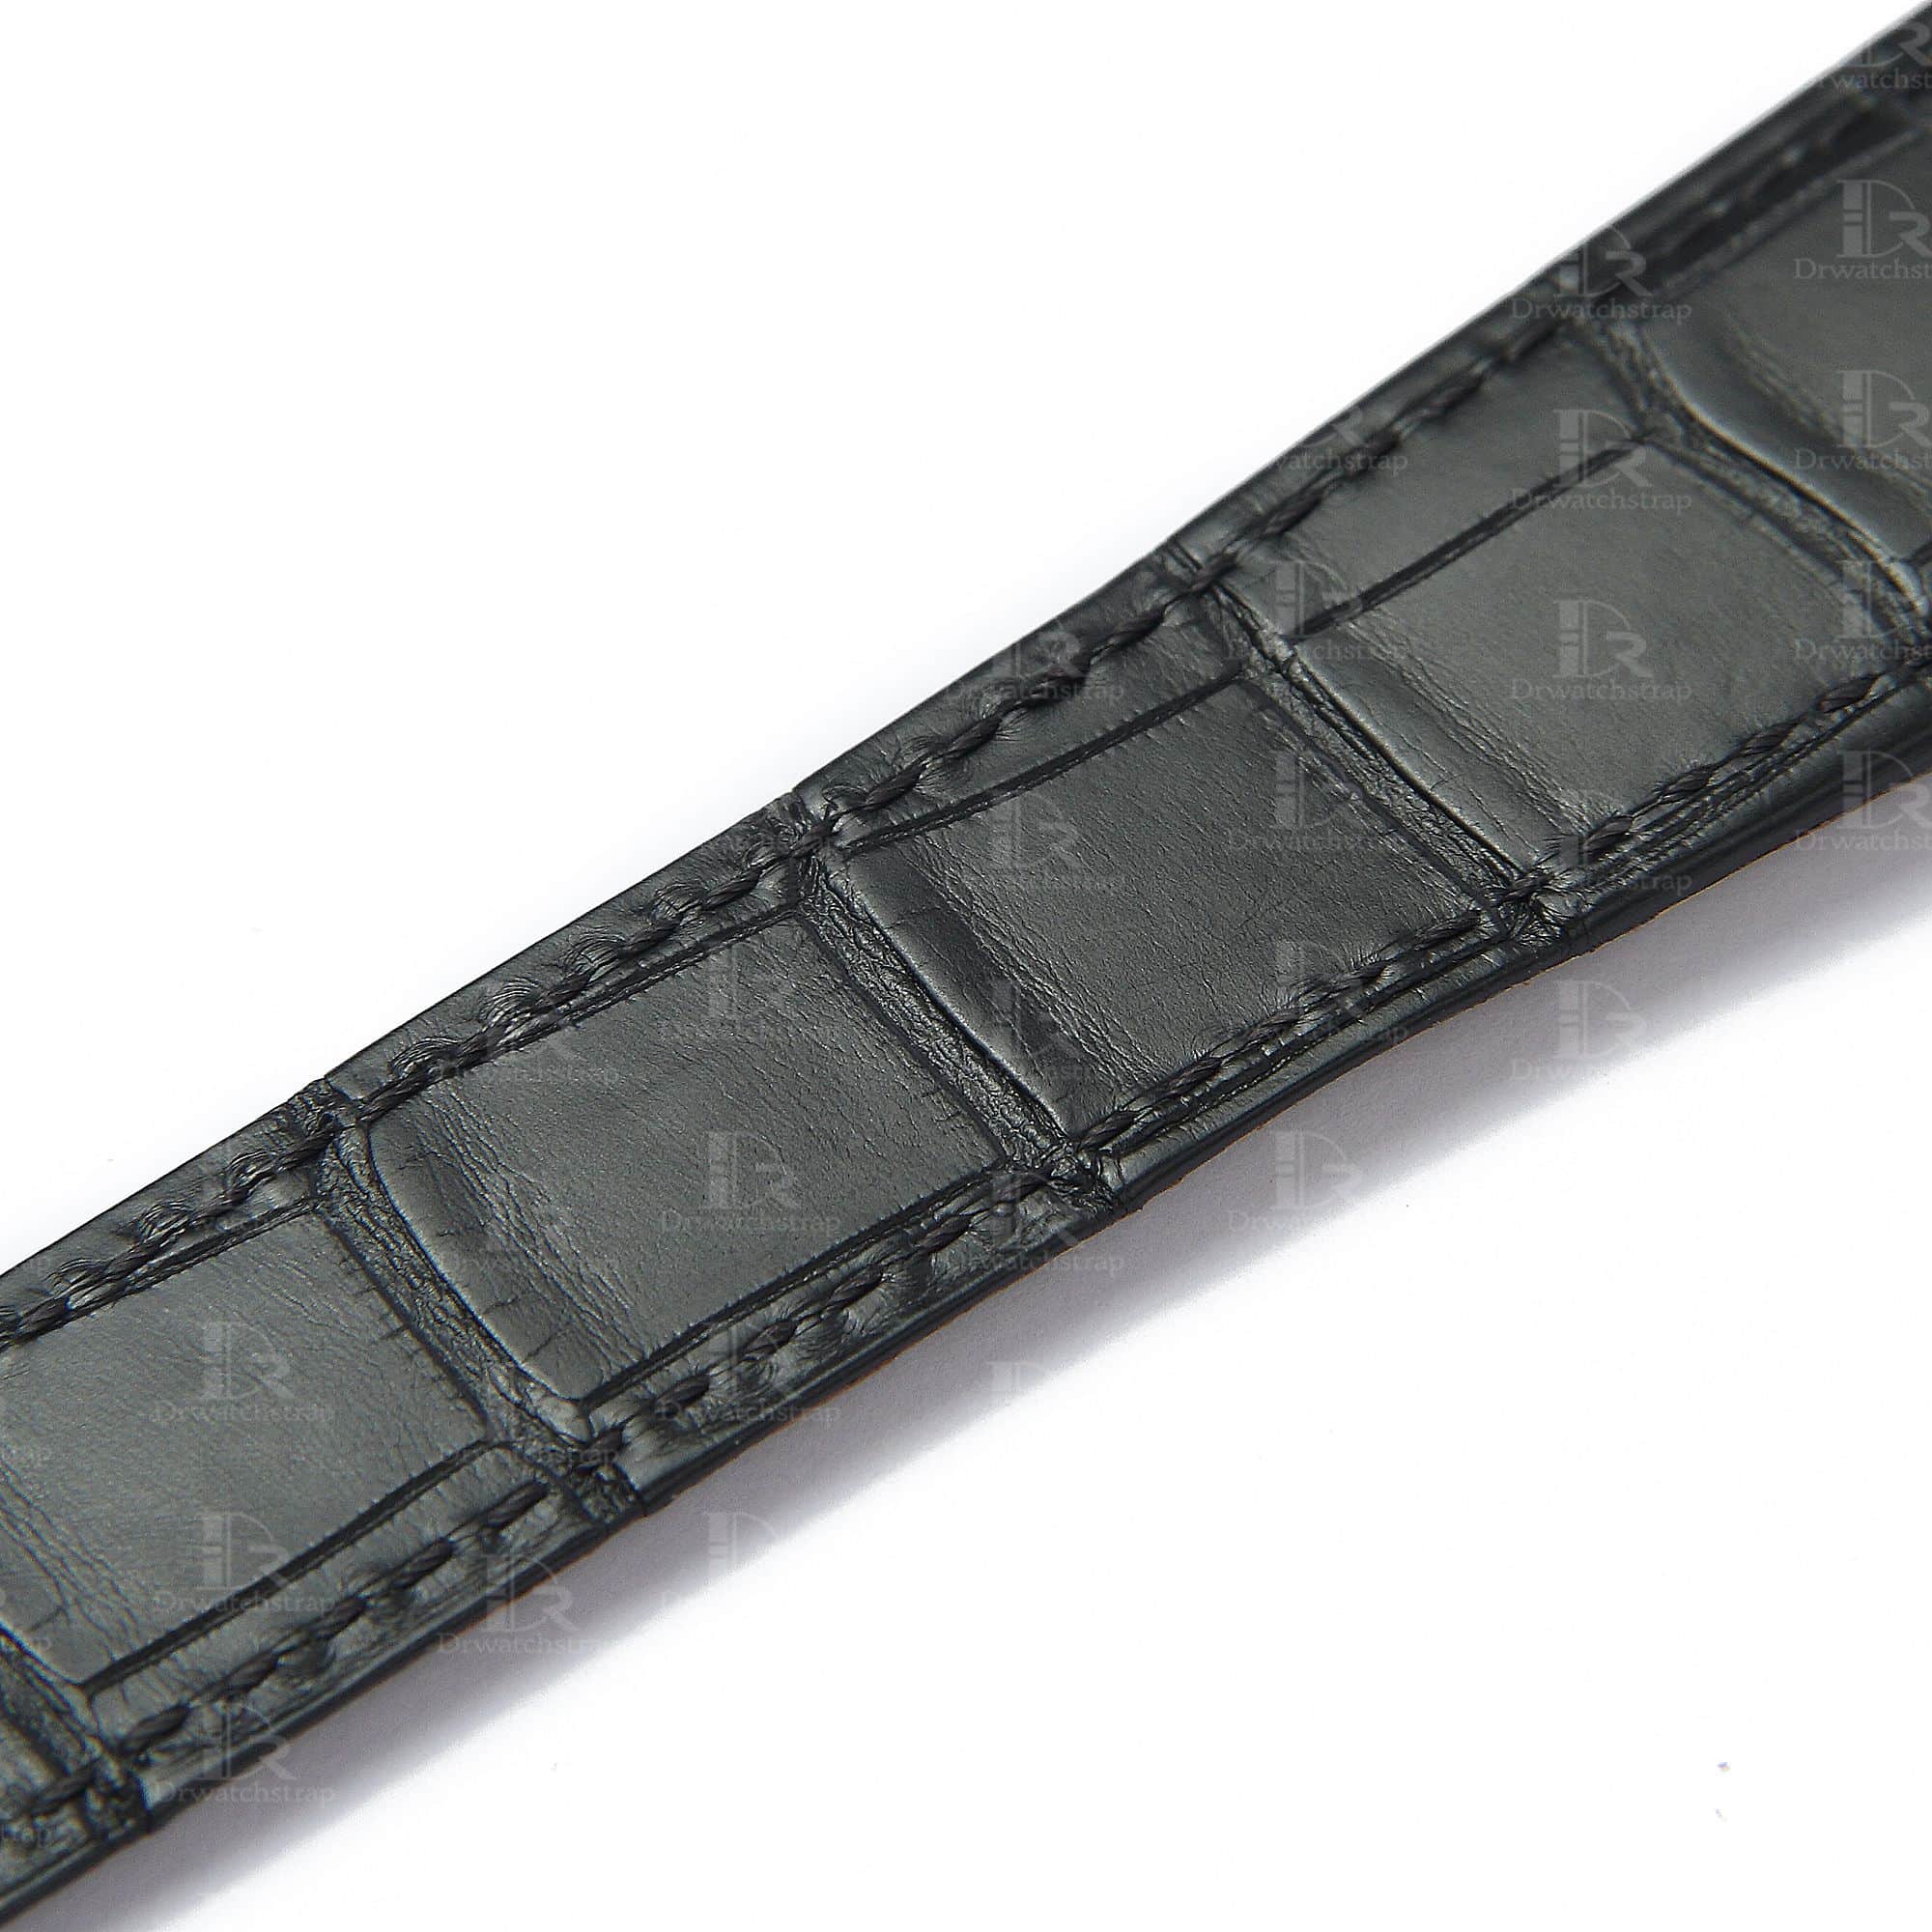 handcrafted black alligator leather watch strap for Cartier Calibre dive watch band